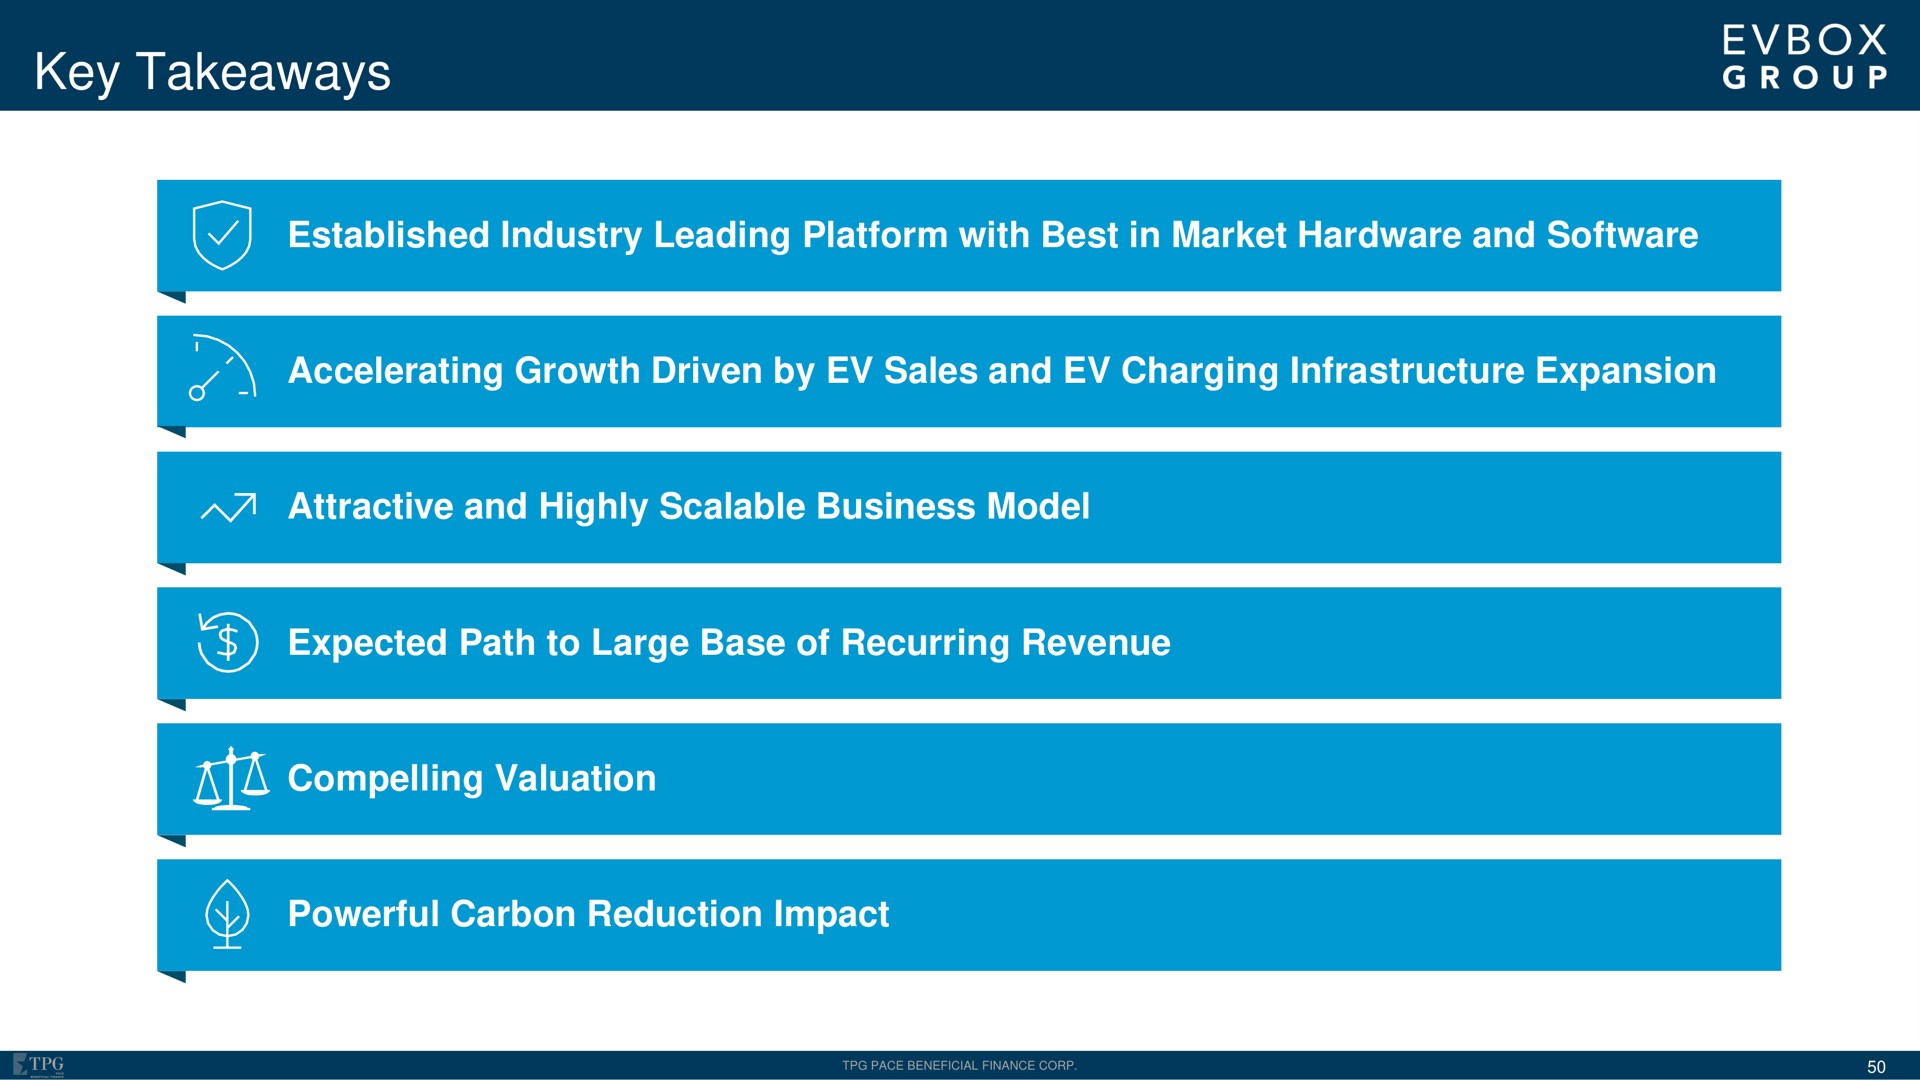 key established industry leading platform with best in market hardware and accelerating growth driven by sales and charging infrastructure expansion attractive and highly scalable business model expected path to large base of recurring revenue compelling valuation powerful carbon reduction impact group | EVBox